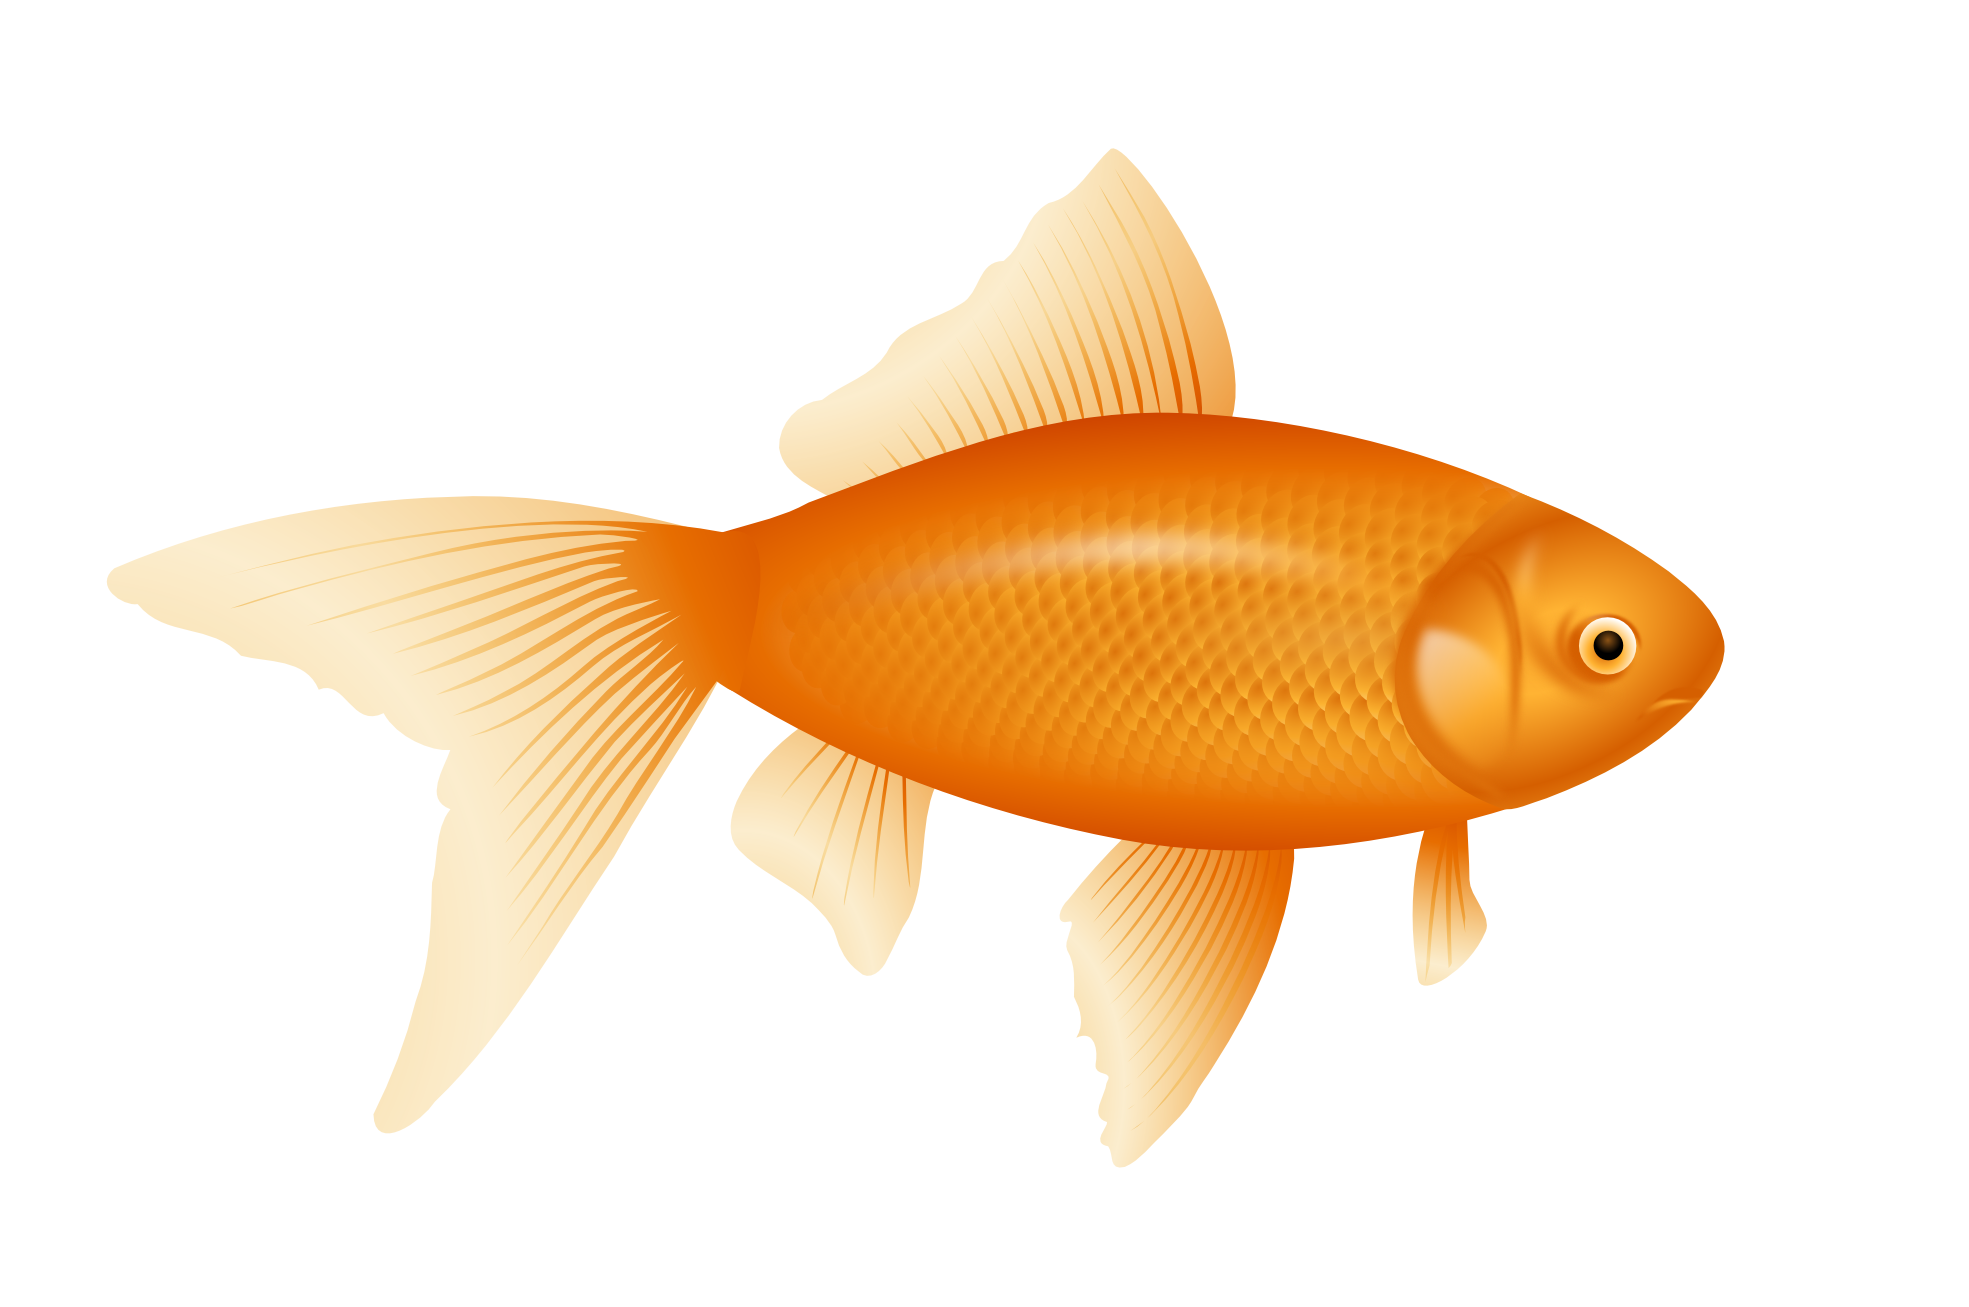 Example Image Of A Fish - Picture Of Fish, Transparent background PNG HD thumbnail